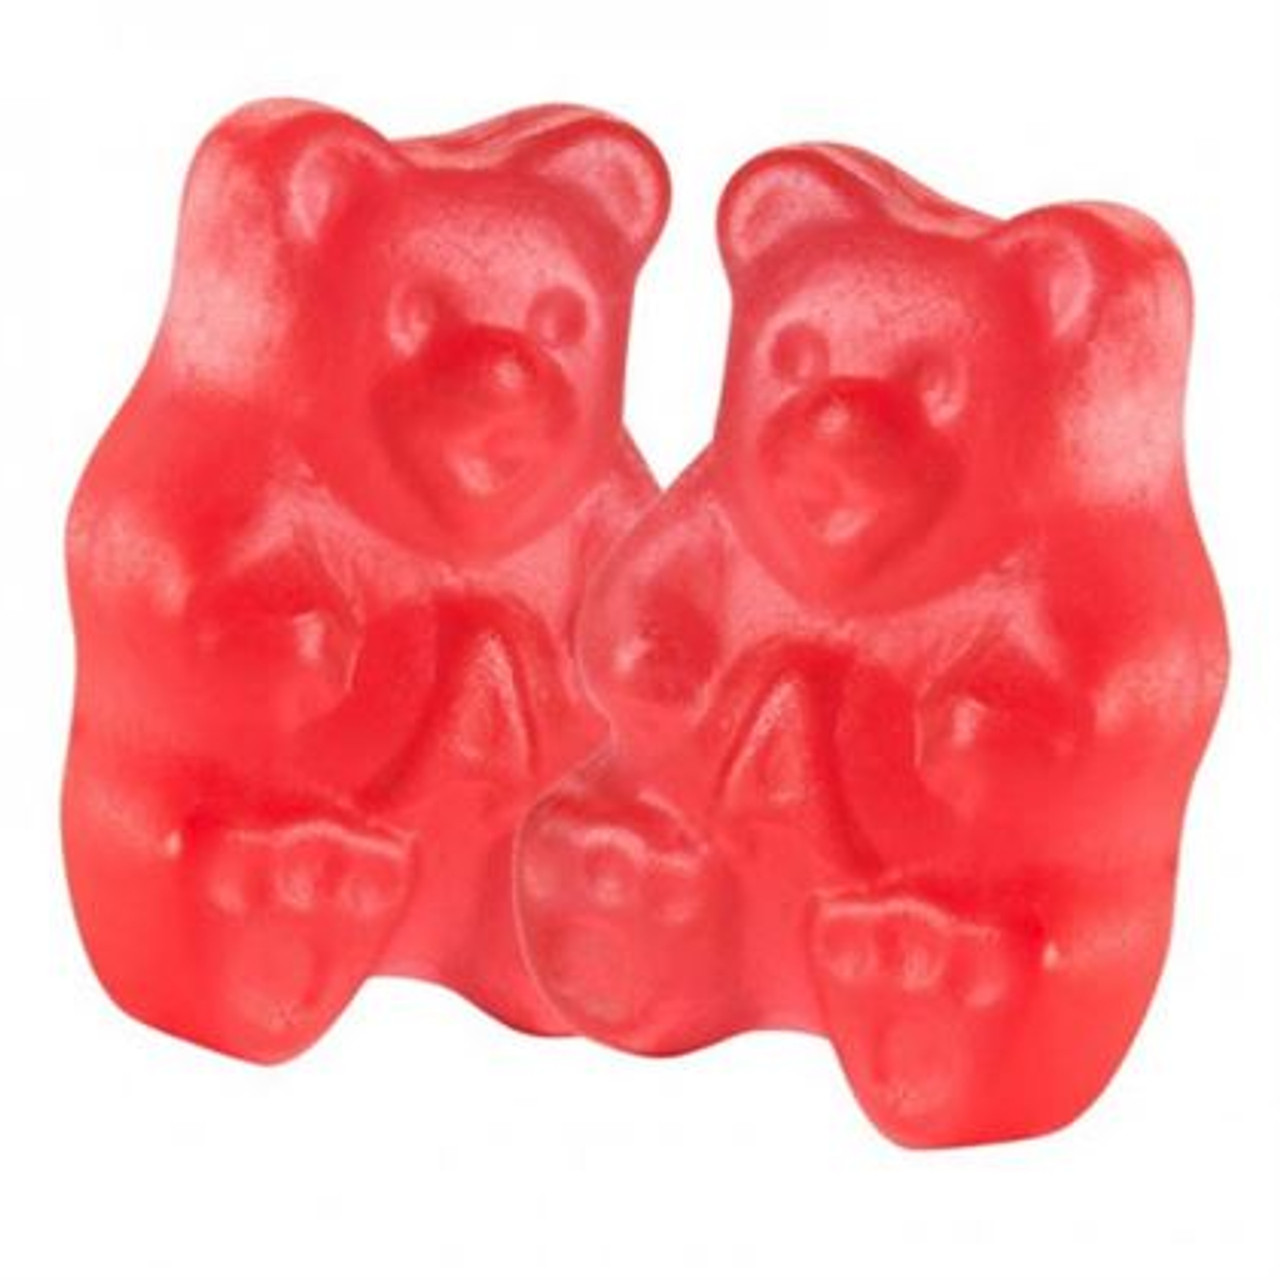 12 Colors / Flavors Gummy Bears by the pound or in bulk